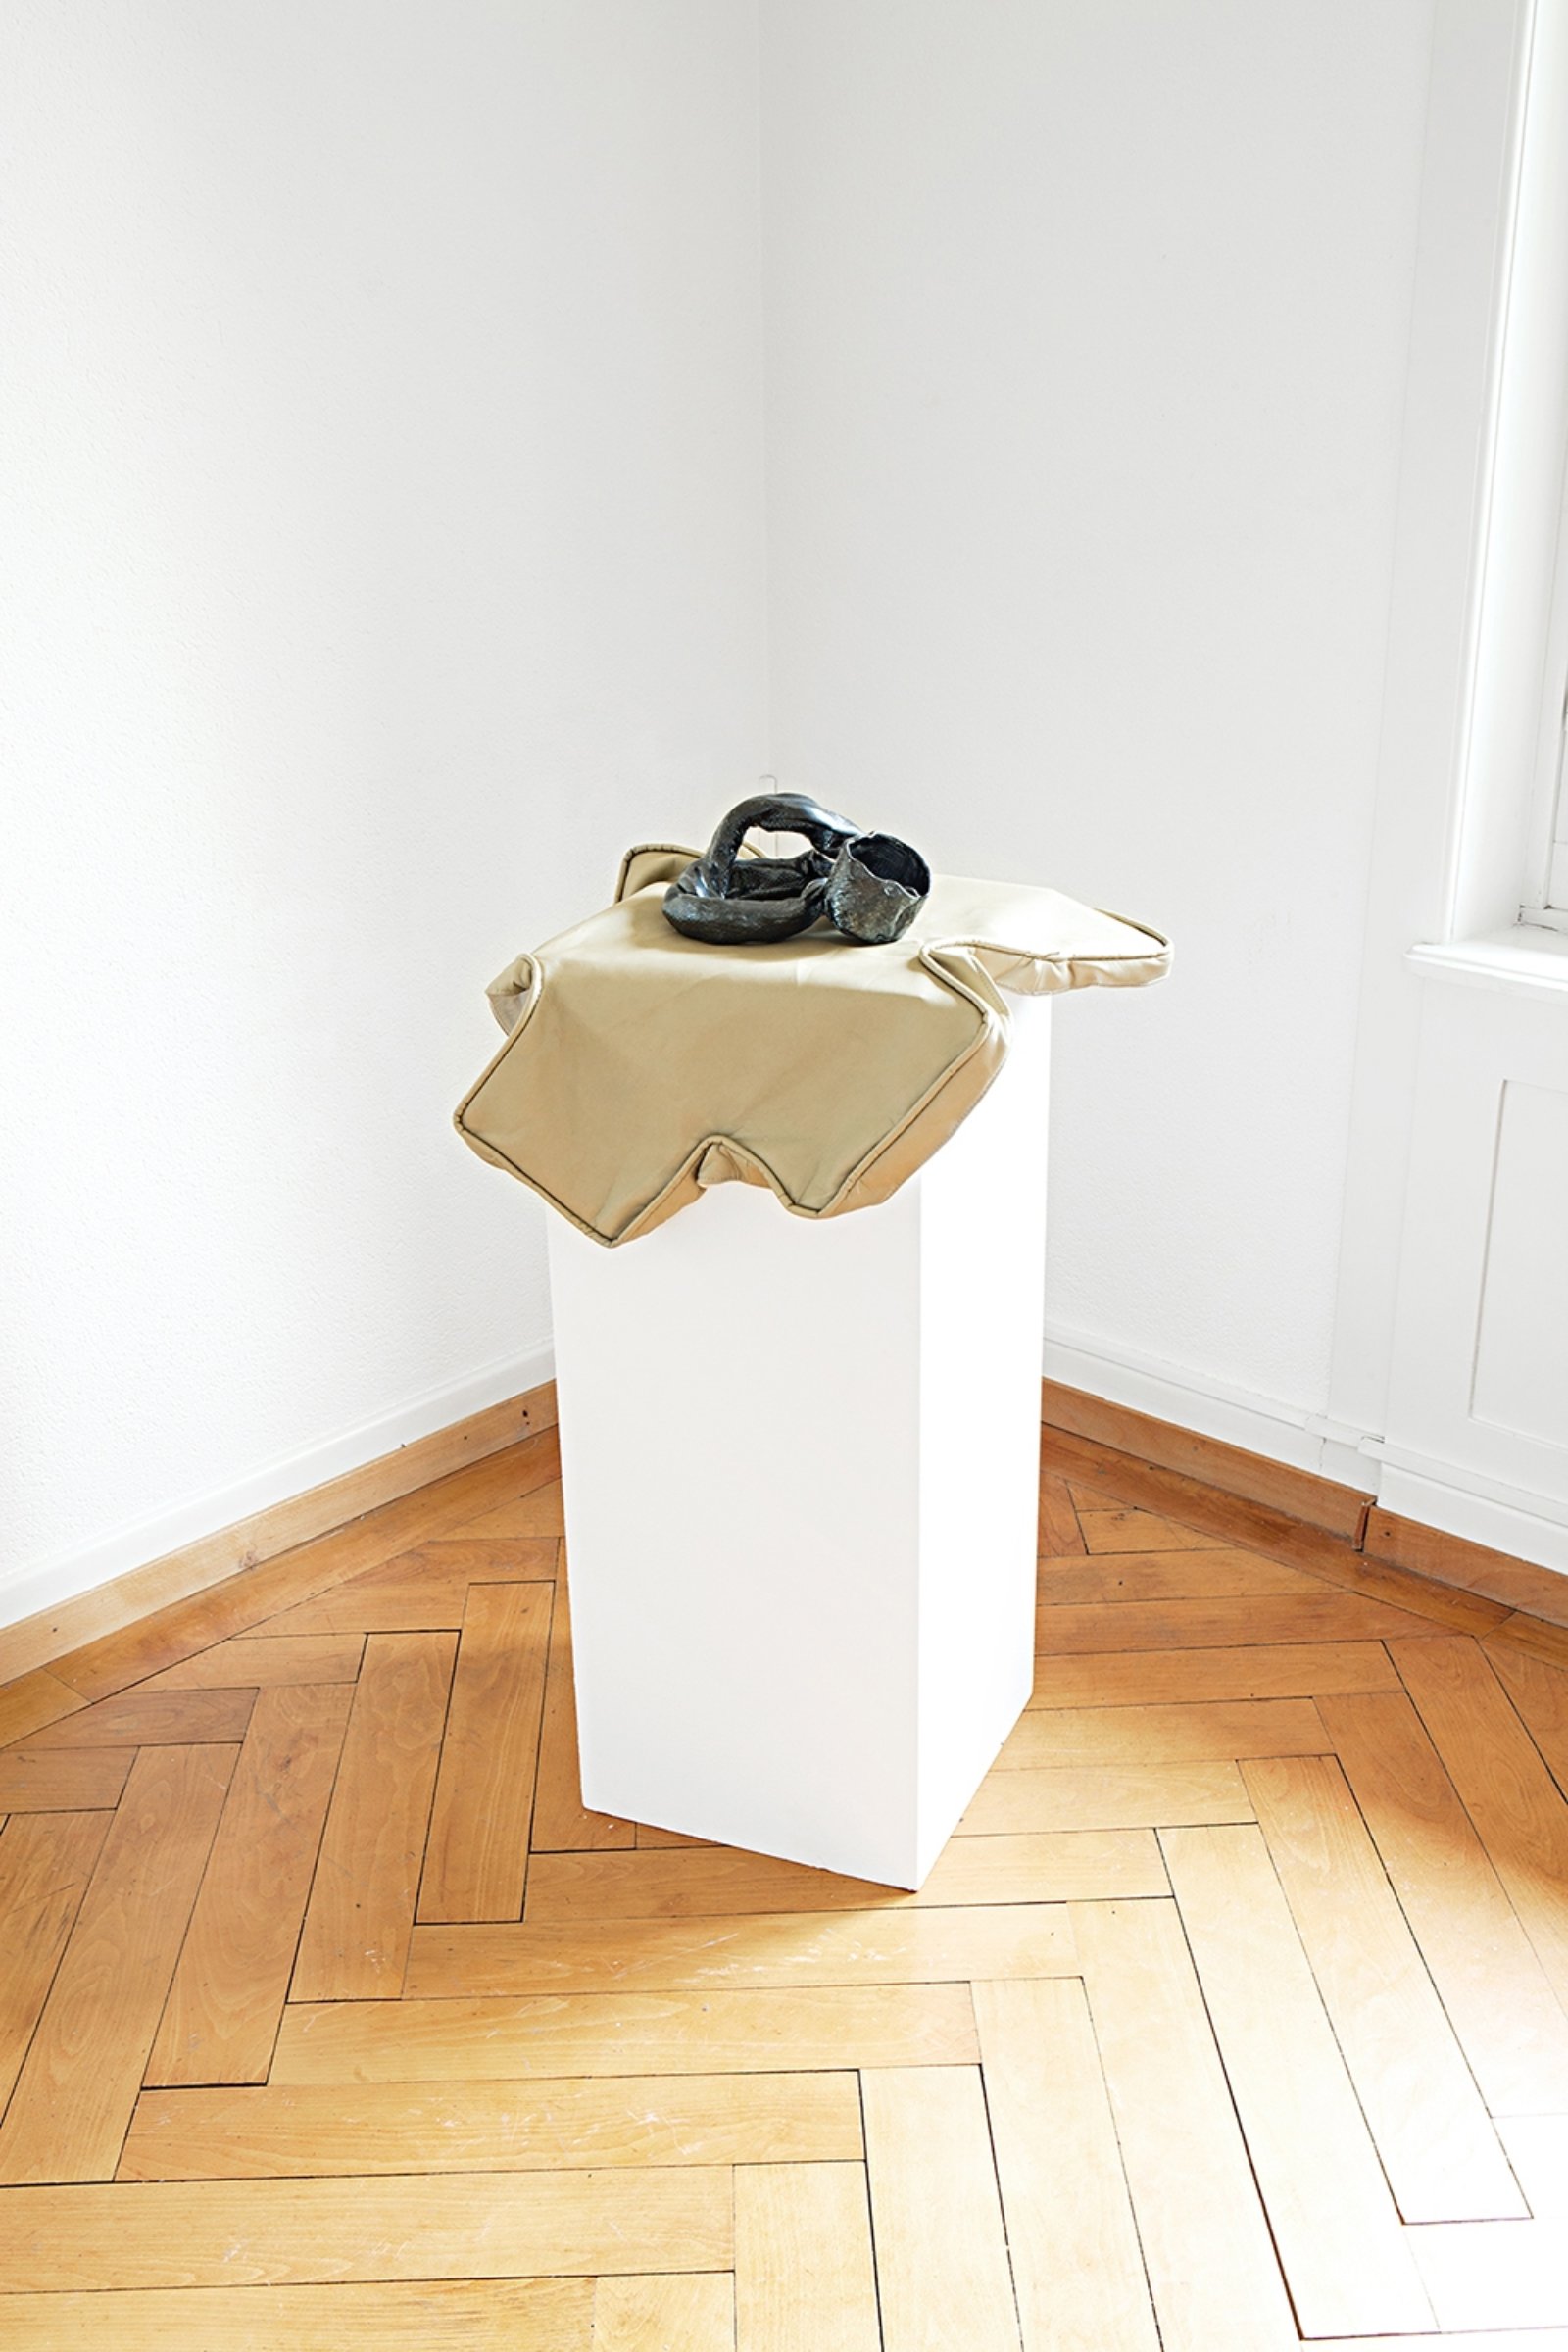 Rochelle Goldberg, I See You P!, 2014, glazed ceramic and cushion, dimensions variable